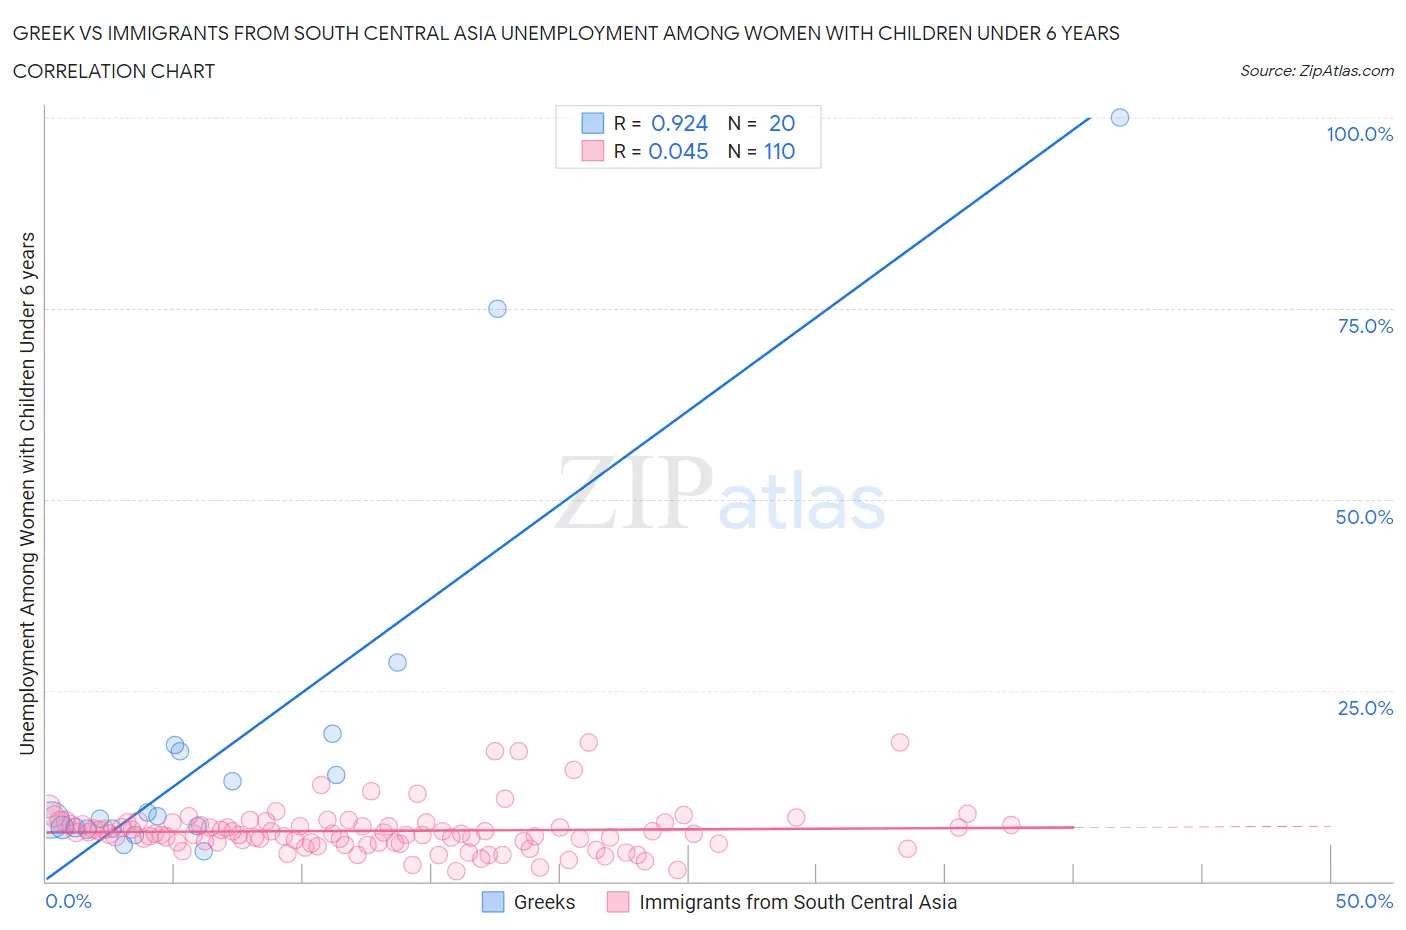 Greek vs Immigrants from South Central Asia Unemployment Among Women with Children Under 6 years